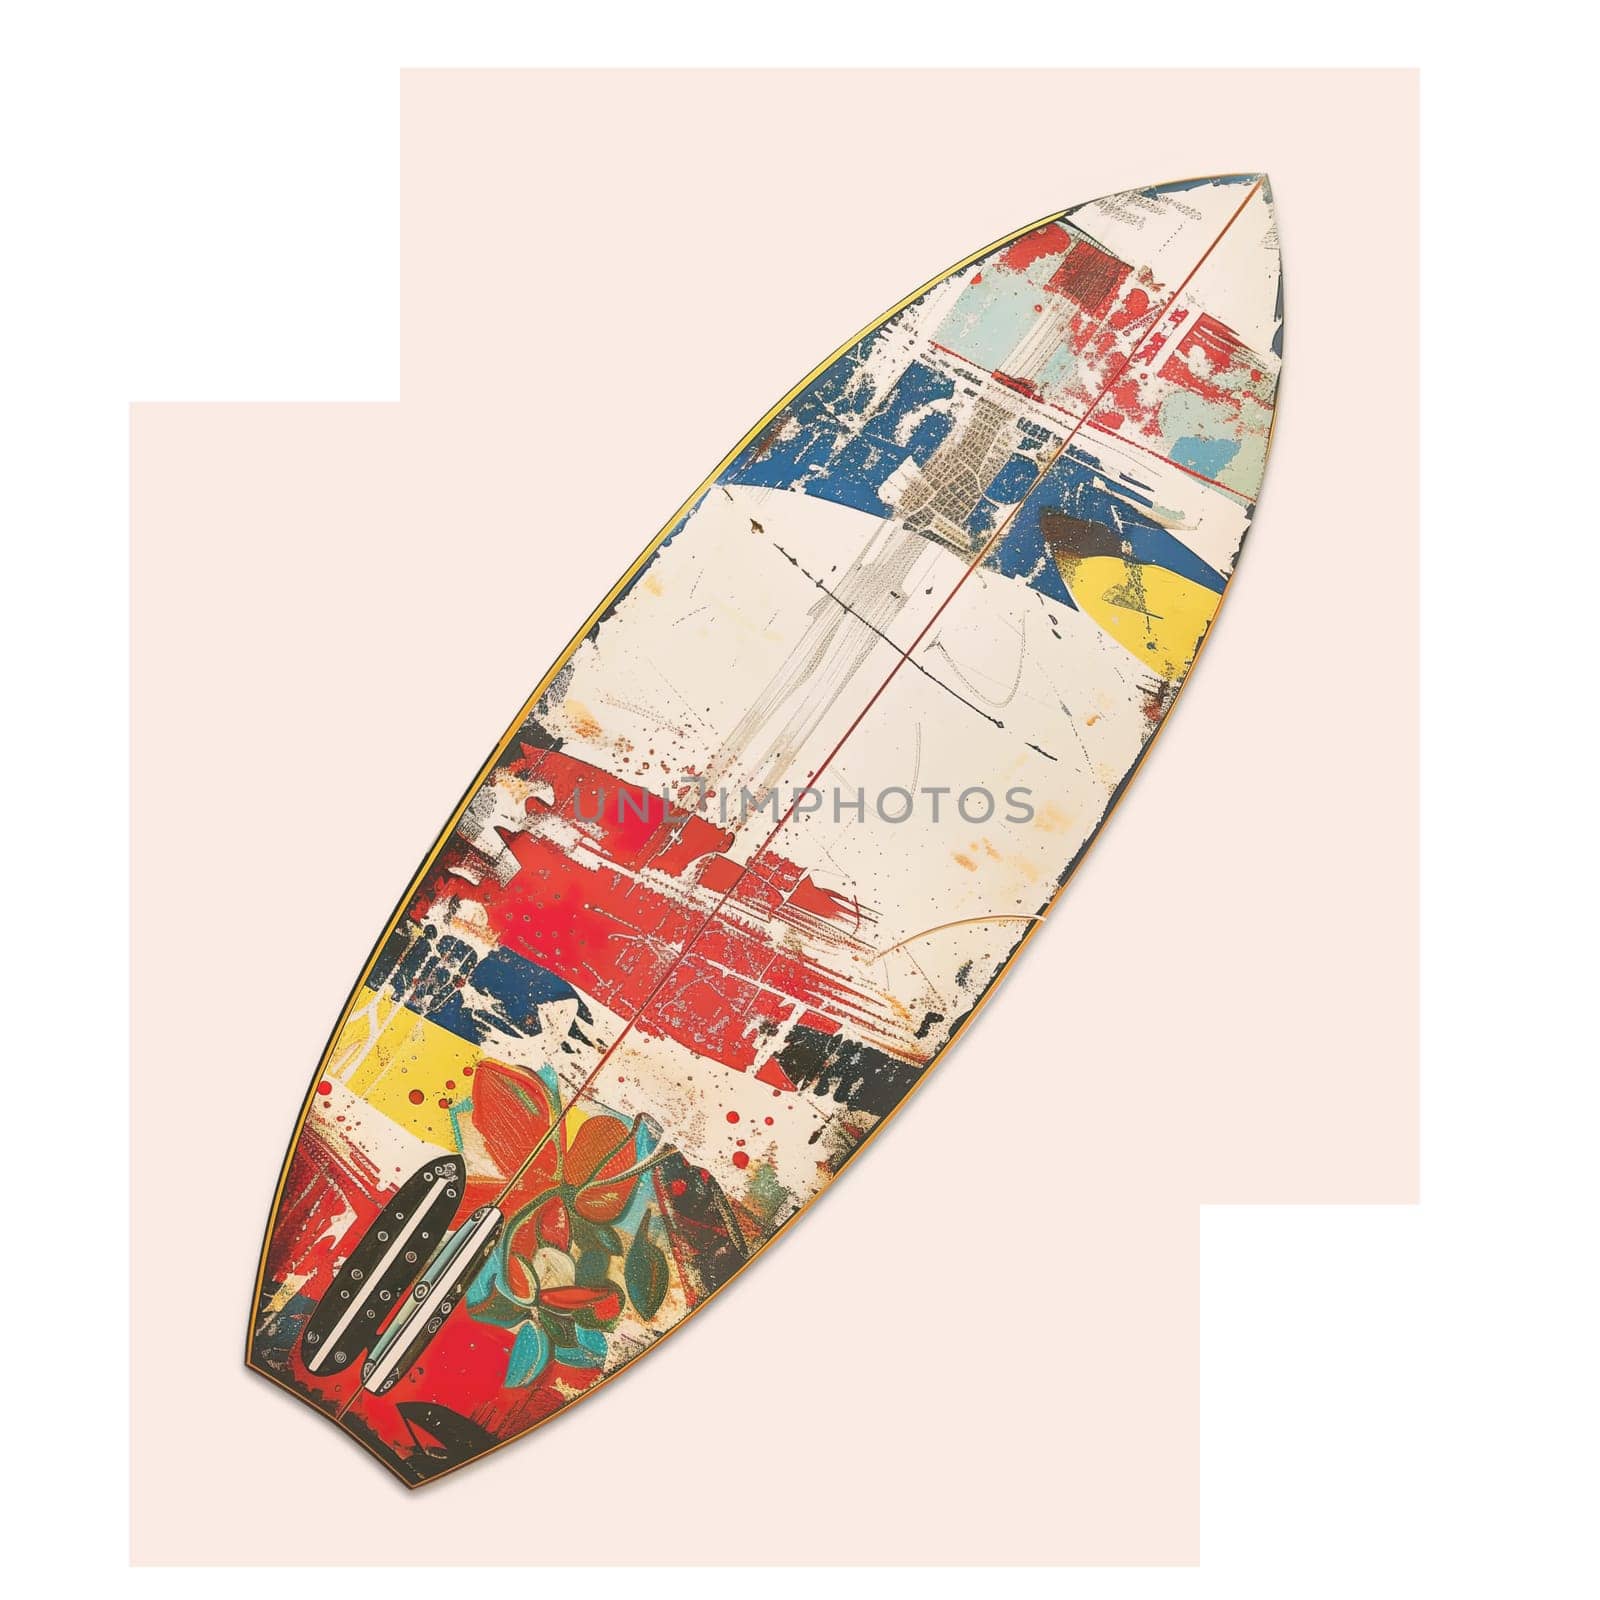 Surf board color cut out image by Dustick